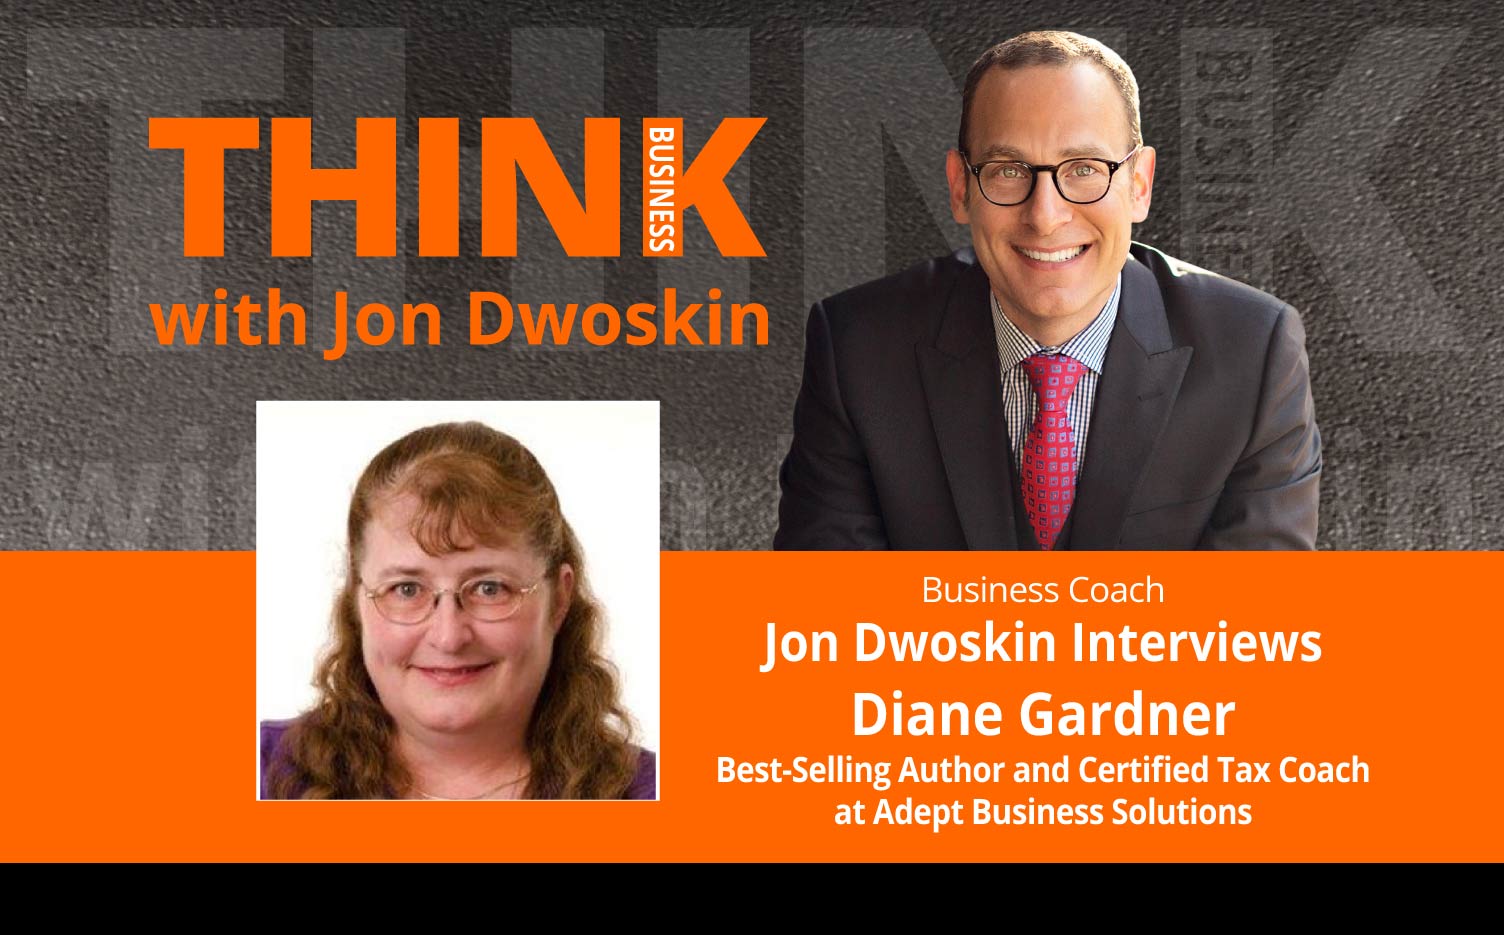 THINK Business Podcast: Jon Dwoskin Interviews Diane Gardner, Best-Selling Author and Certified Tax Coach at Adept Business Solutions